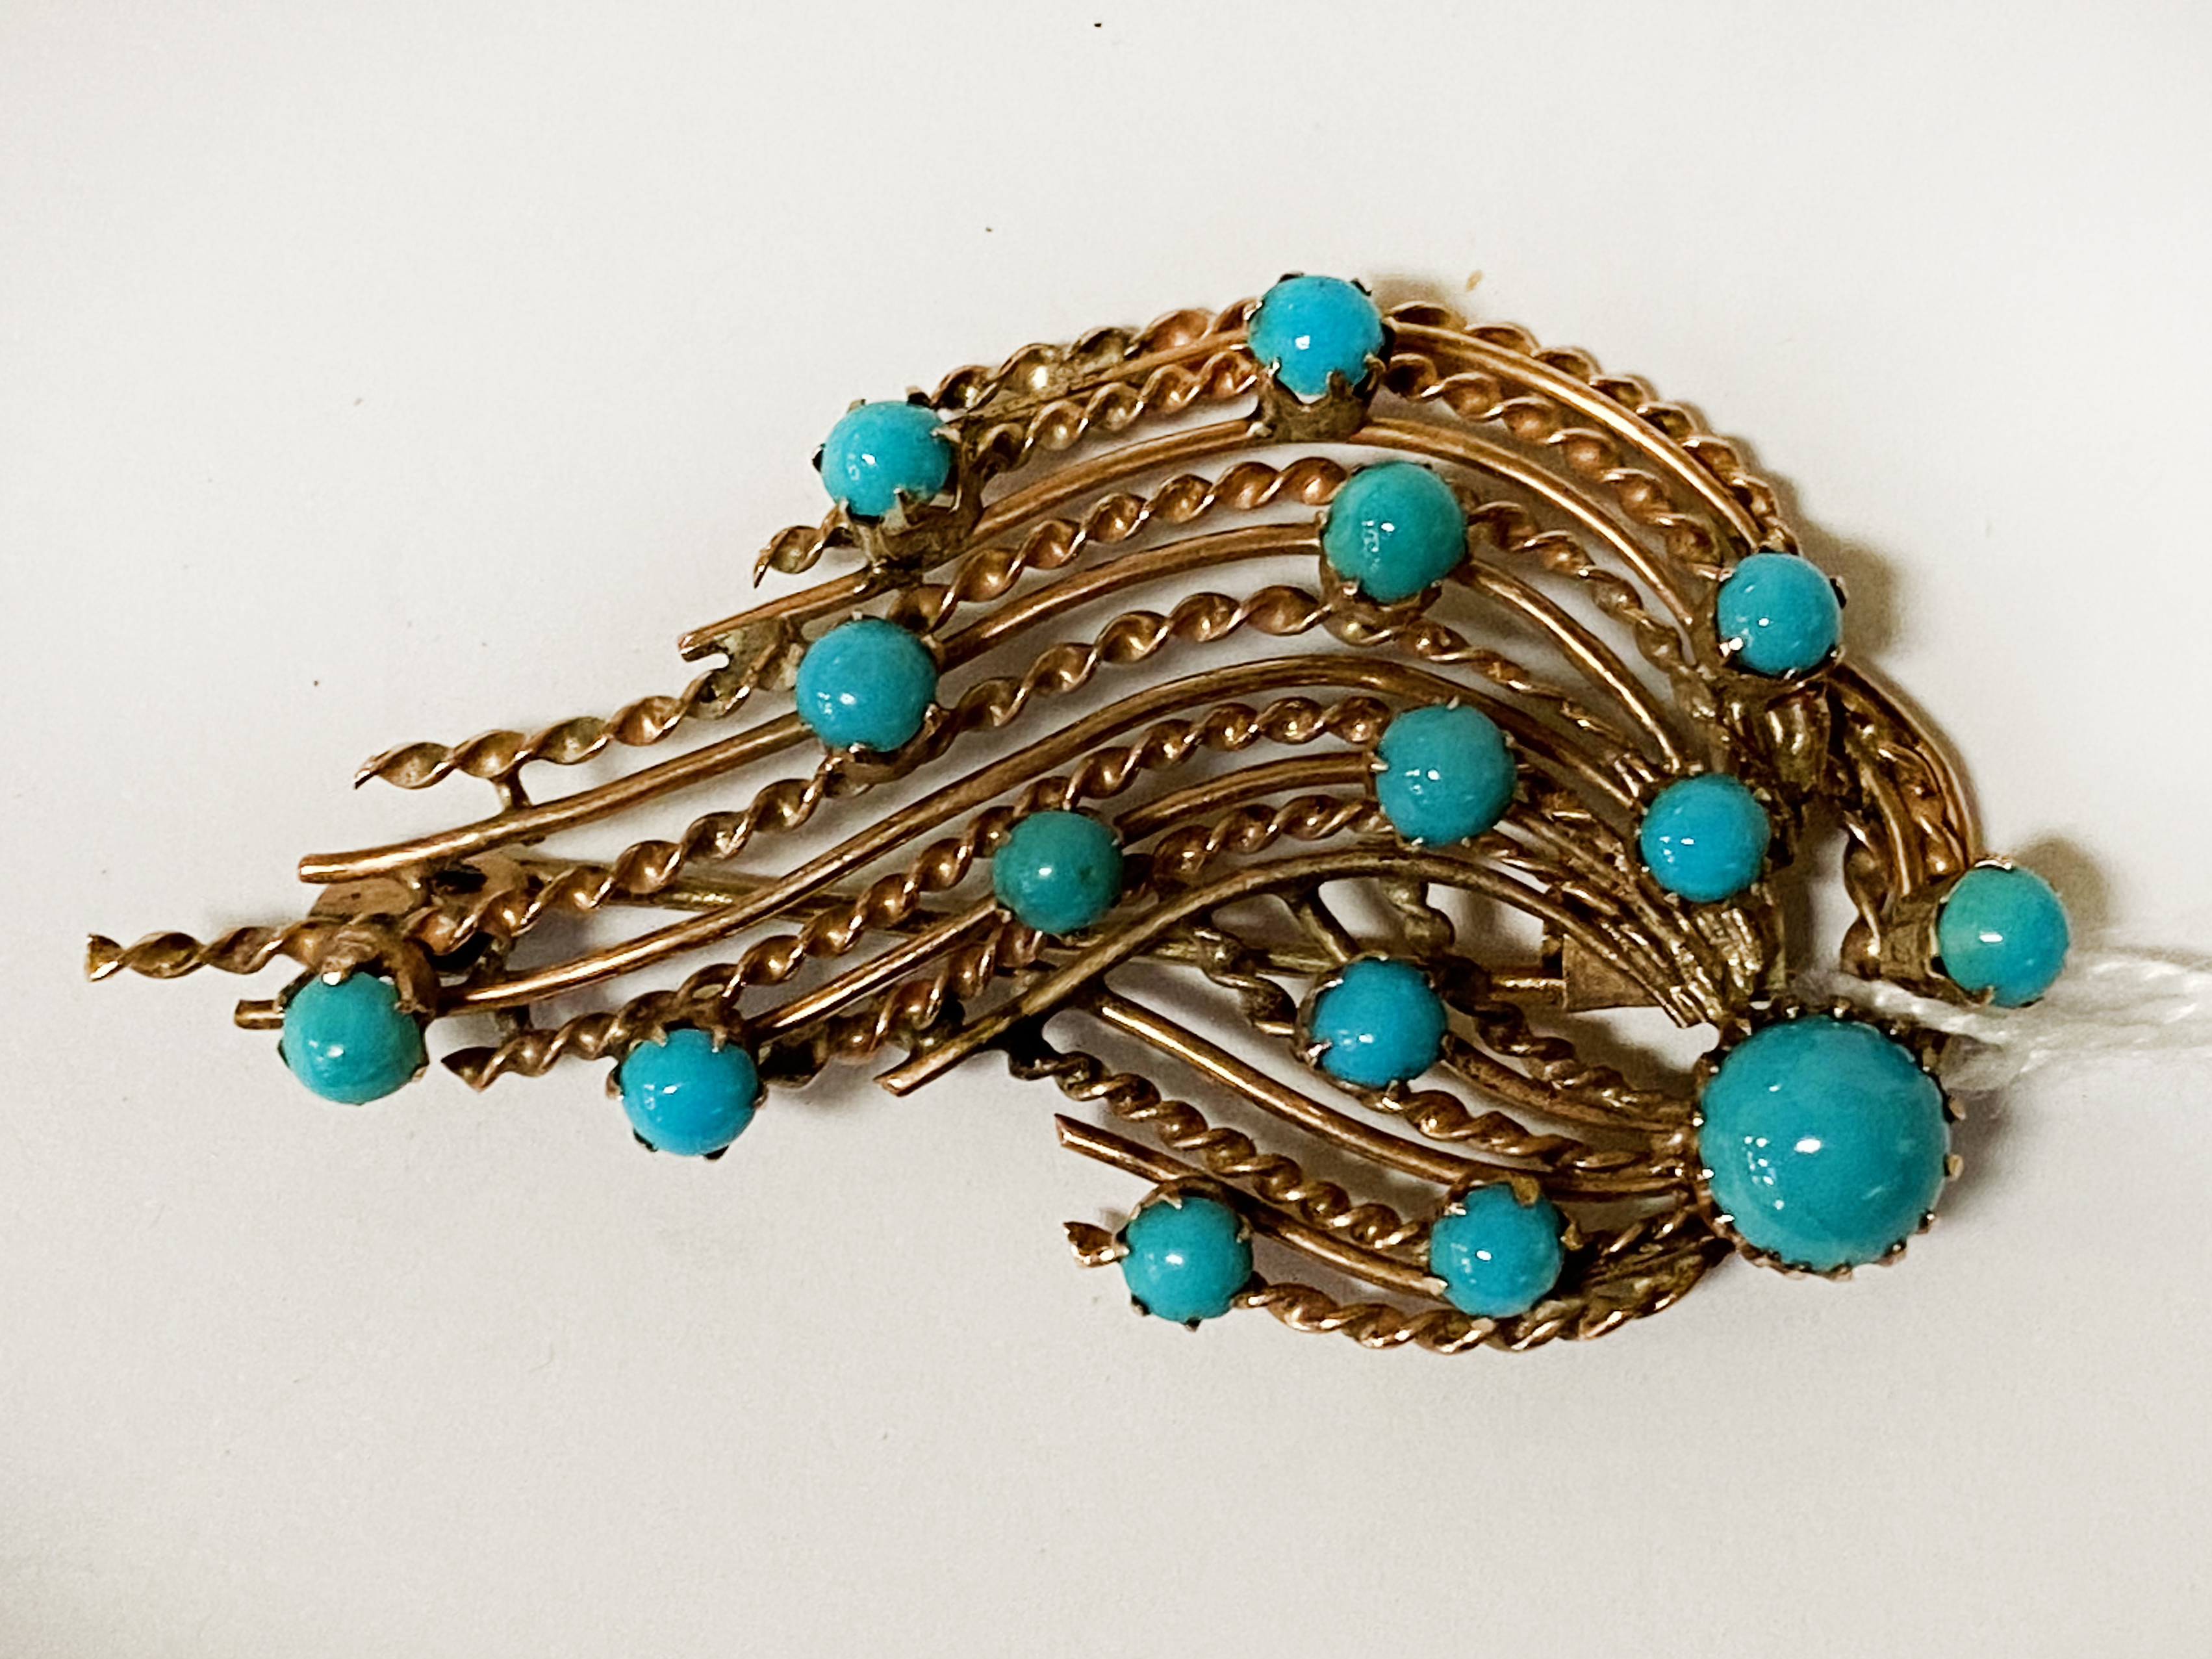 18CT GOLD TURQUOISE BROOCH (TESTED) - 7.1 GRAMS APPROX